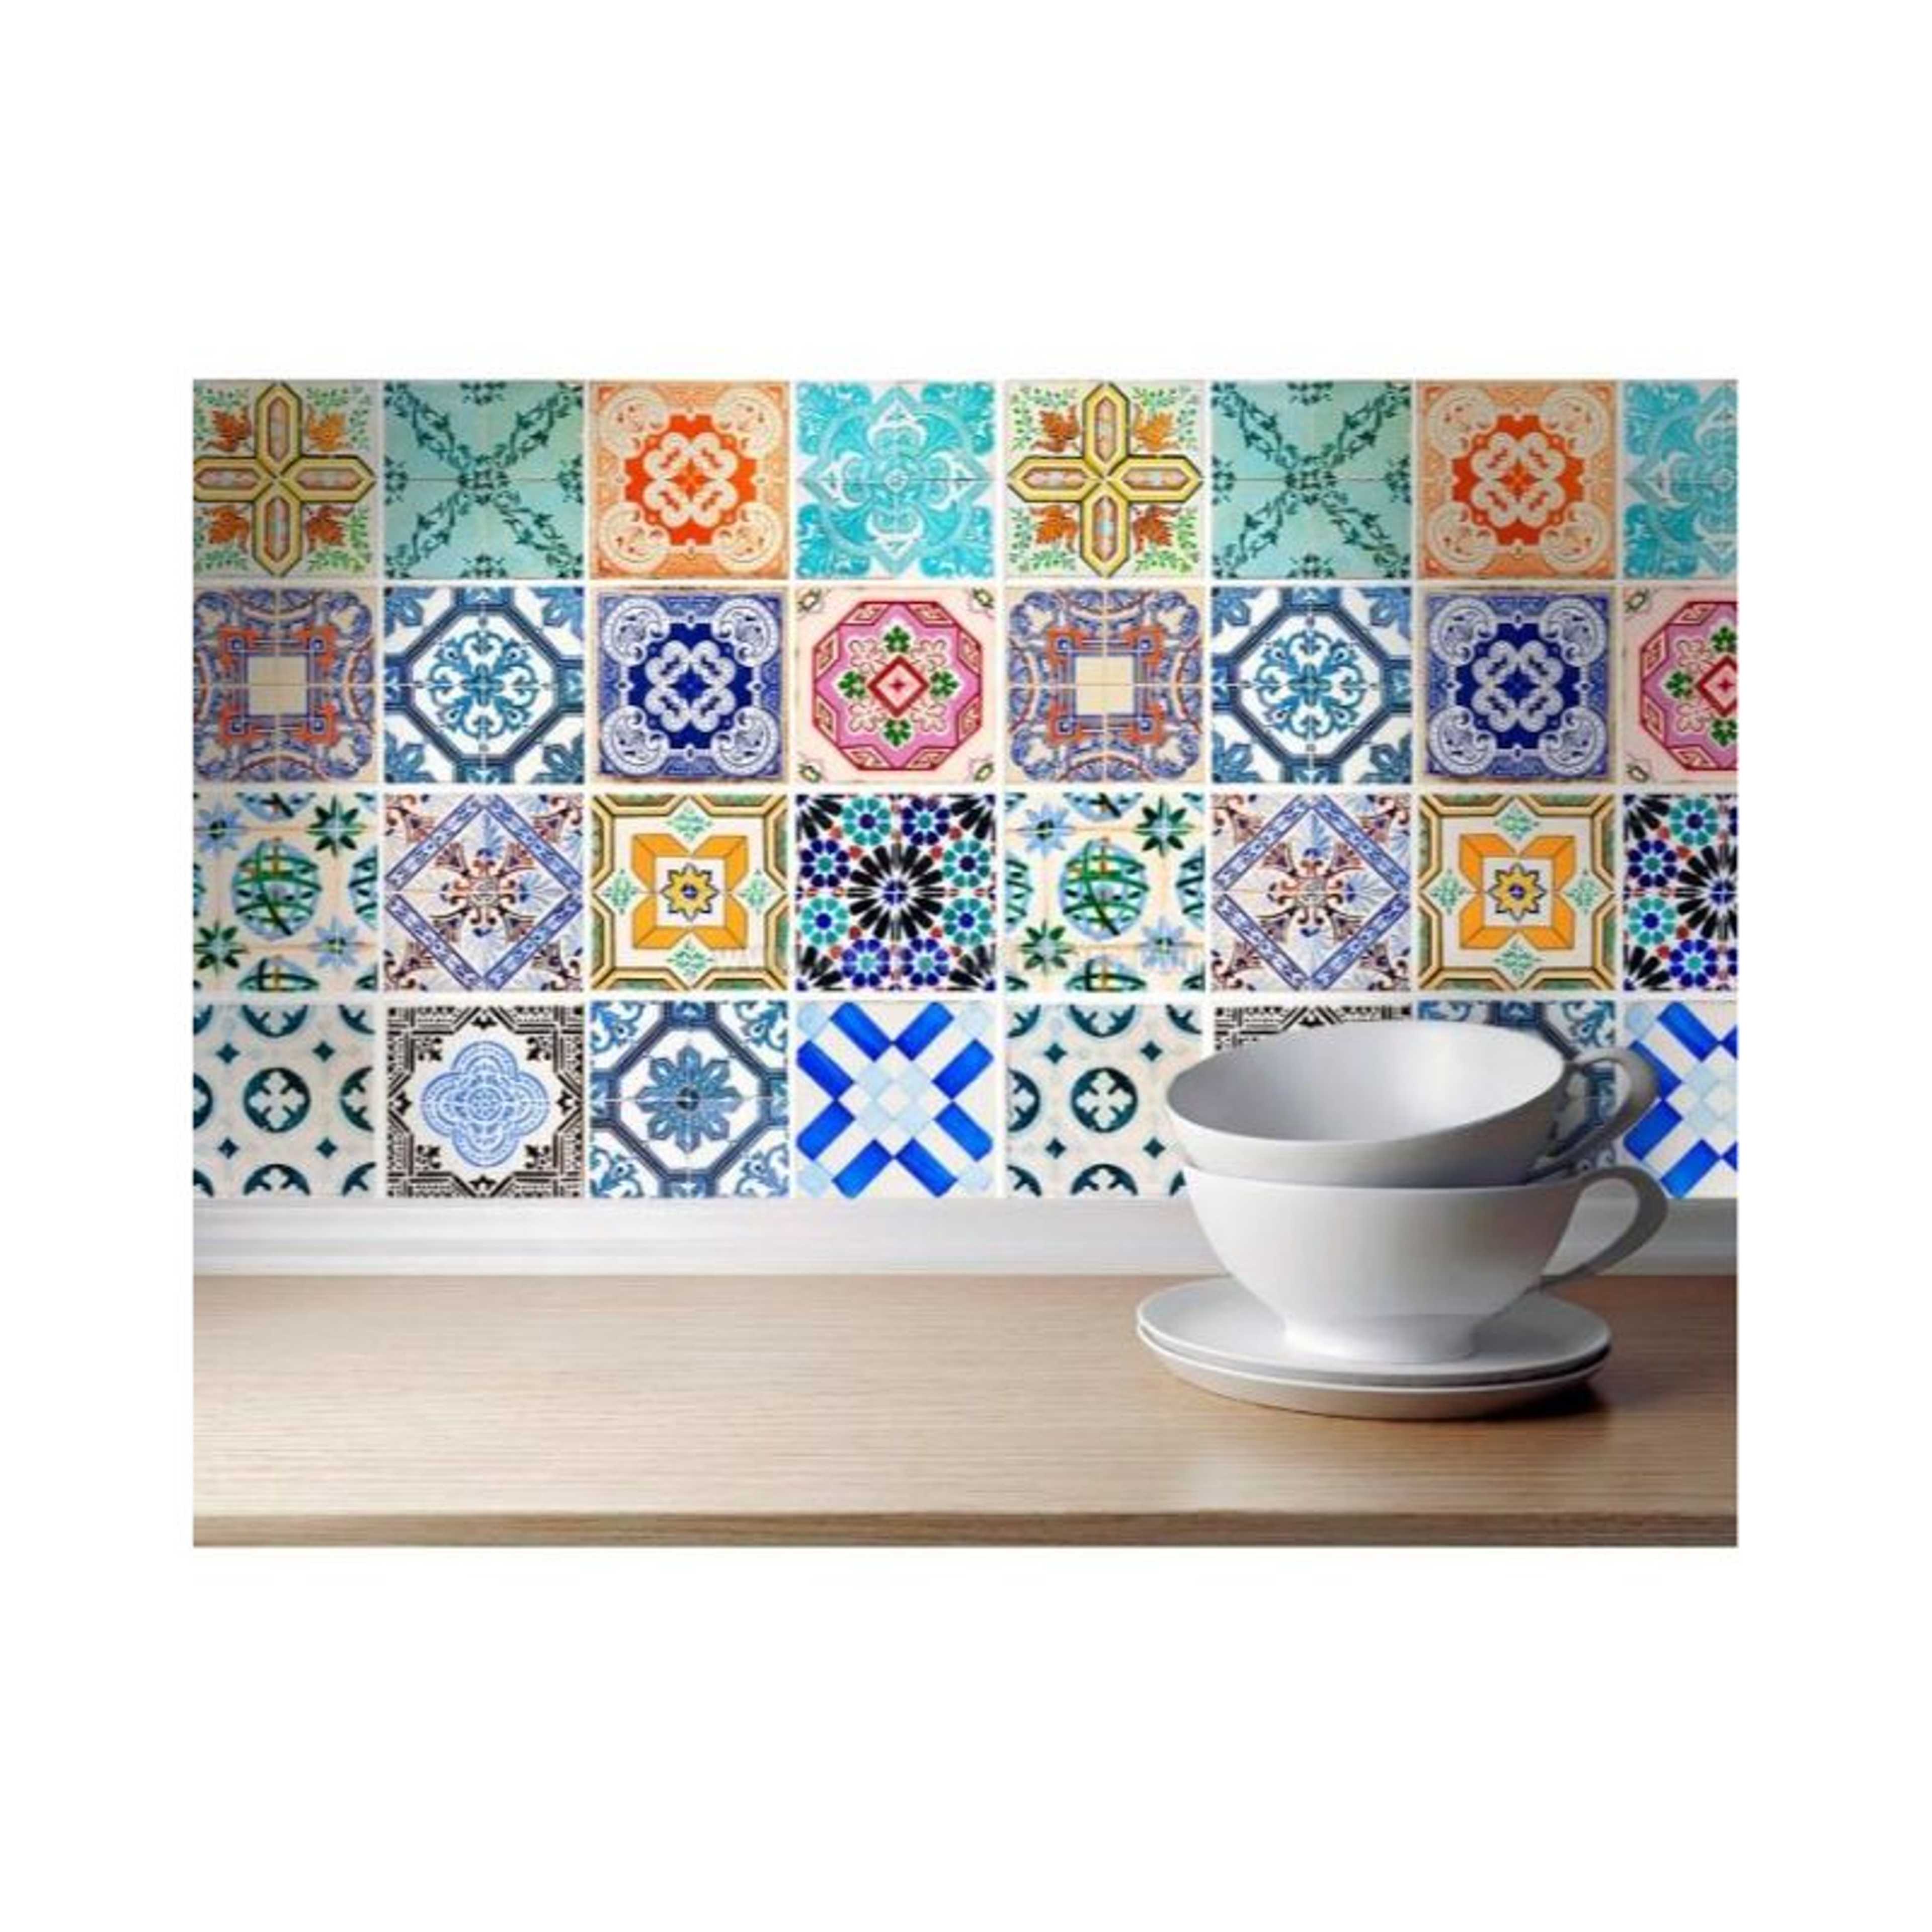 Pack of 24 - Traditional Talavera Moroccan Vintage Tile Stickers for Bathroom & Kitchen - 6x6 Inches each